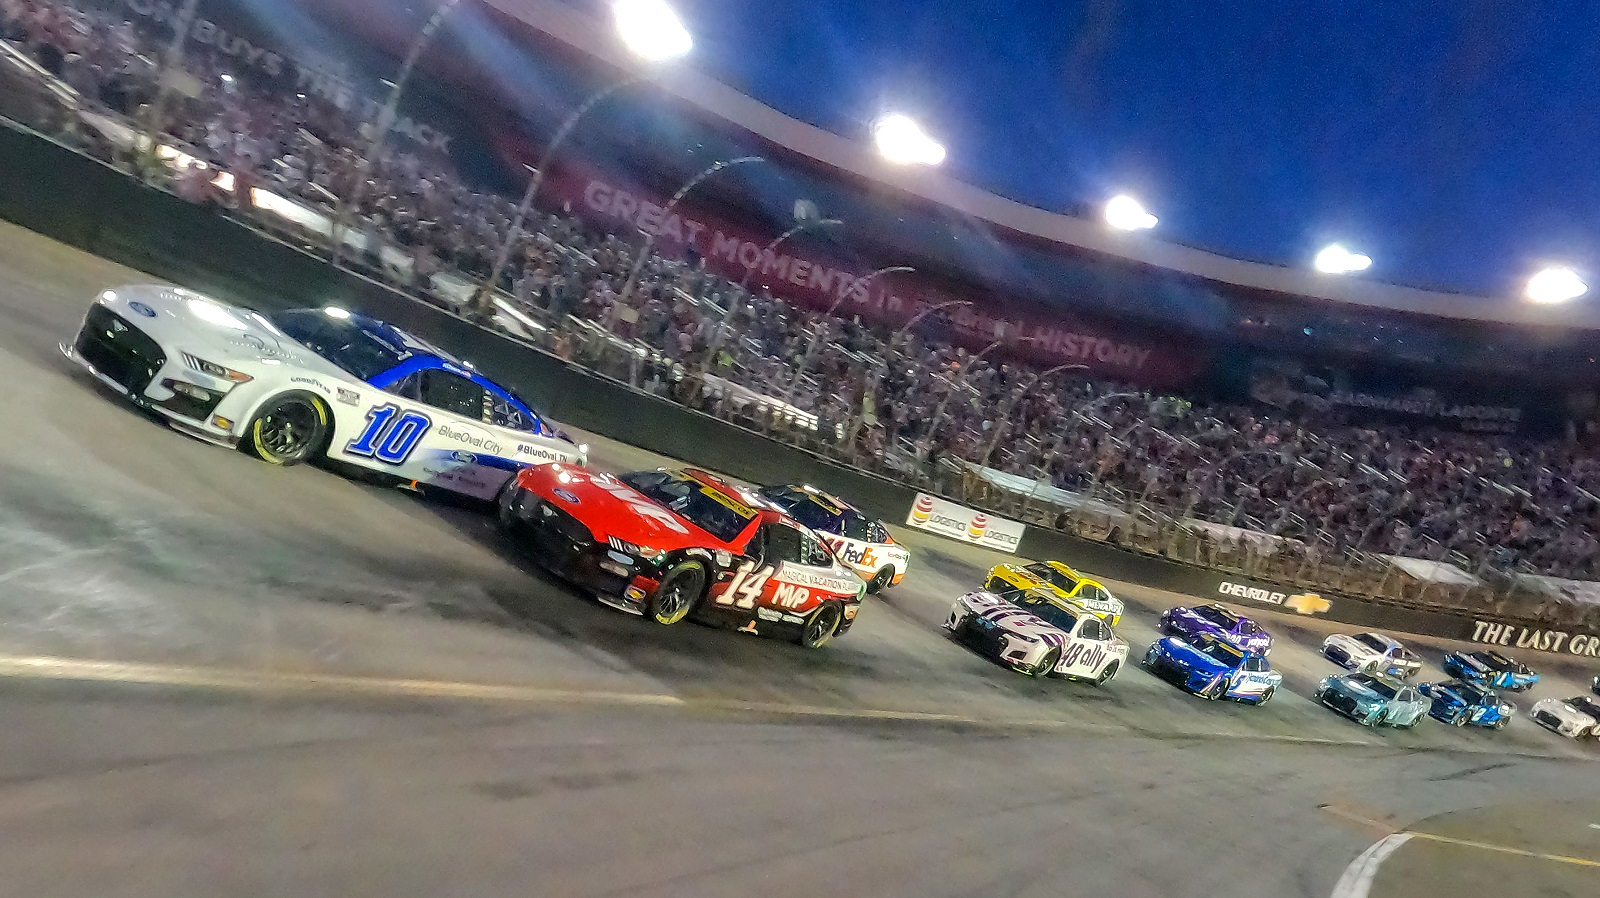 Aric Almirola and Chase Briscoe lead the field on a pace lap prior to the NASCAR Cup Series Bass Pro Shops Night Race at Bristol Motor Speedway on Sept. 17, 2022.